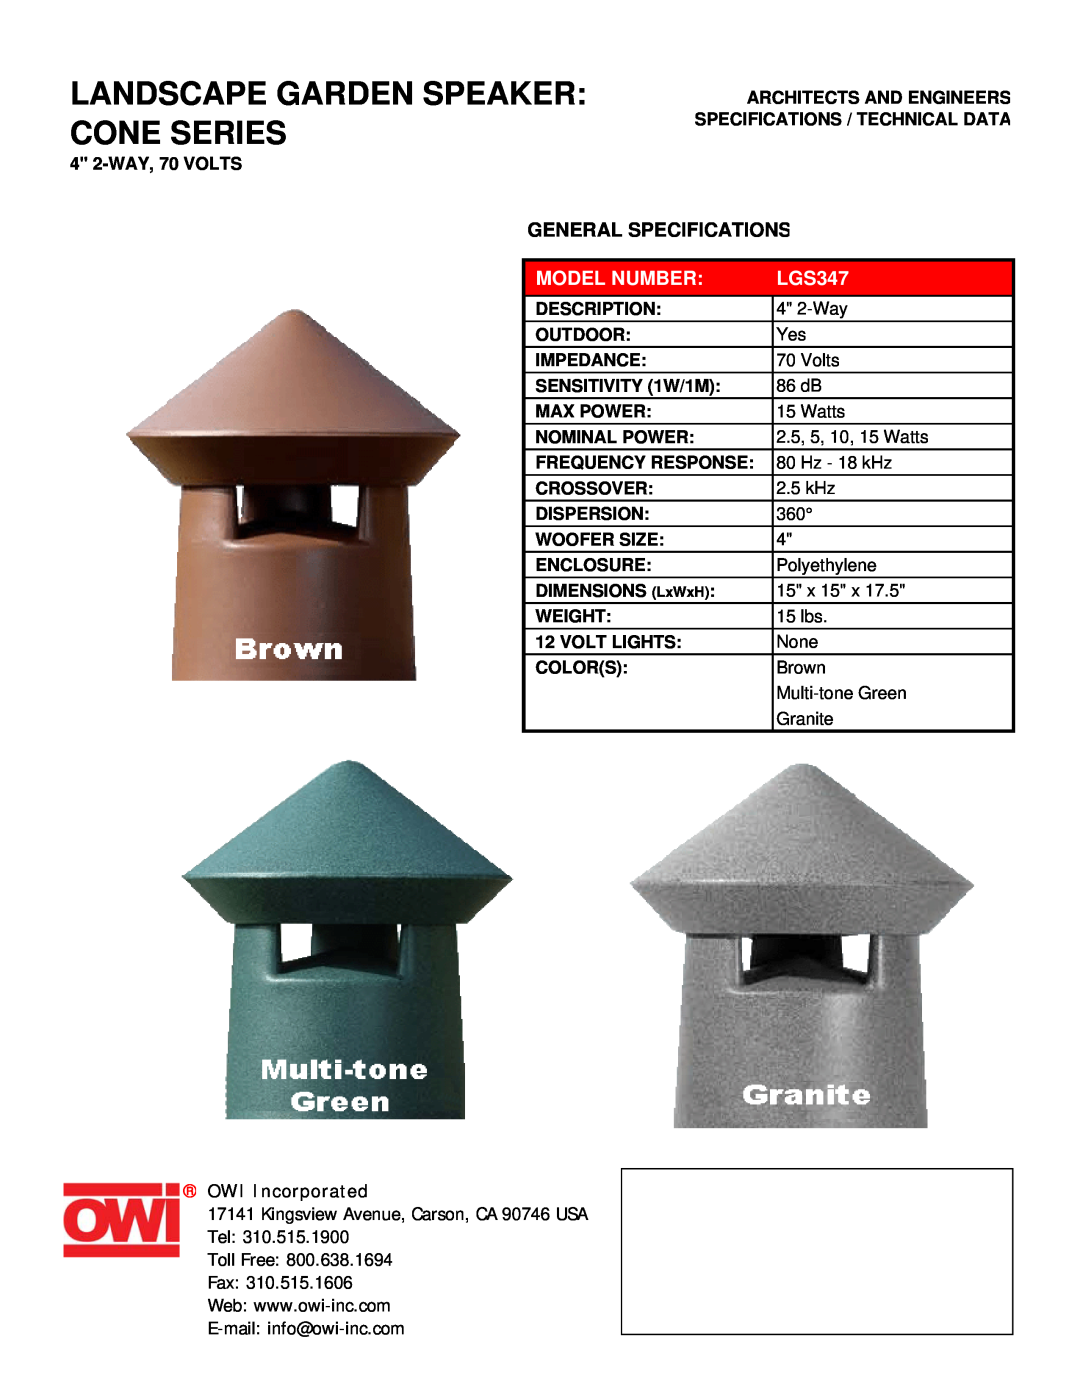 OWI LGS347 specifications Landscape Garden Speaker Cone Series, General Specifications, Model Number, OWI Incorporated 